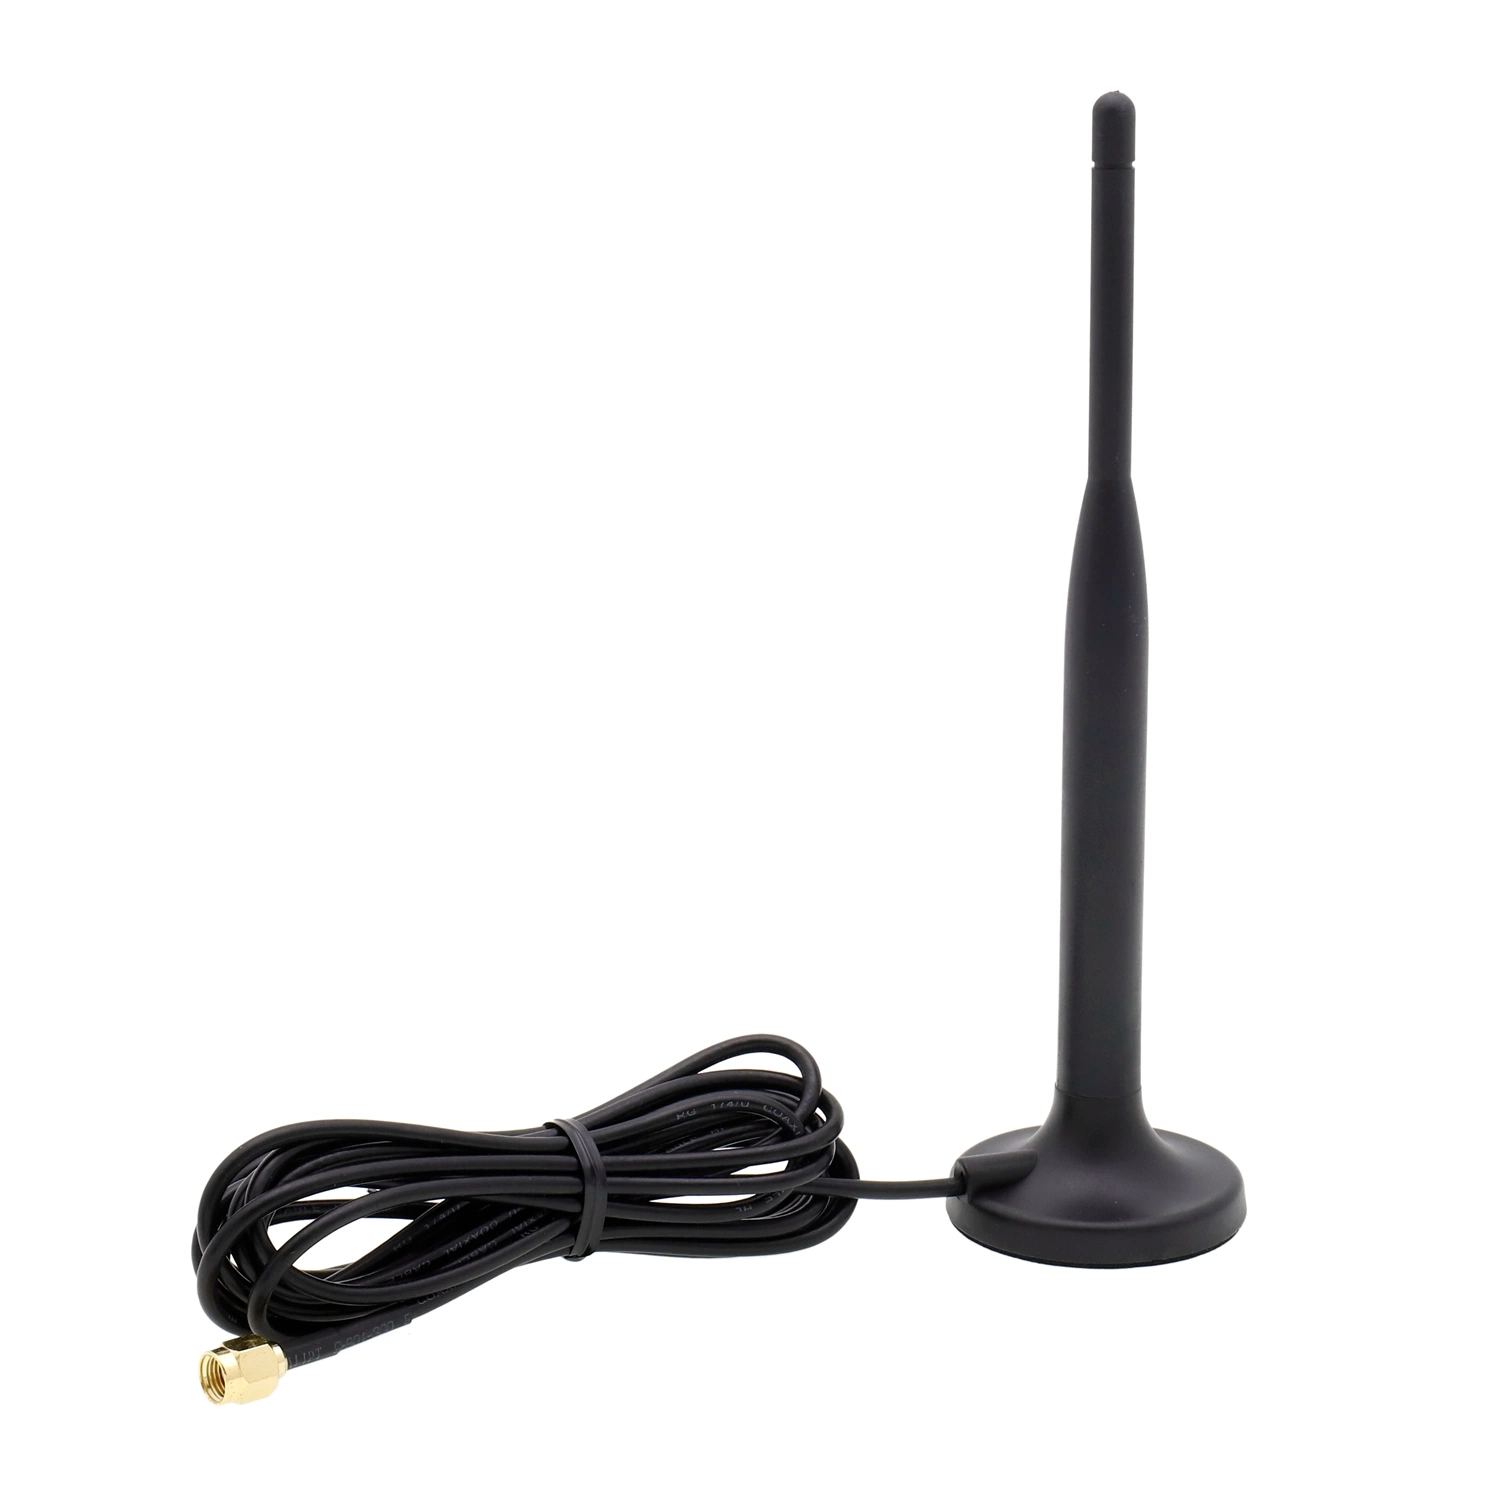 2.4GHz Antenna for Digital Wireless Monitor and Camera